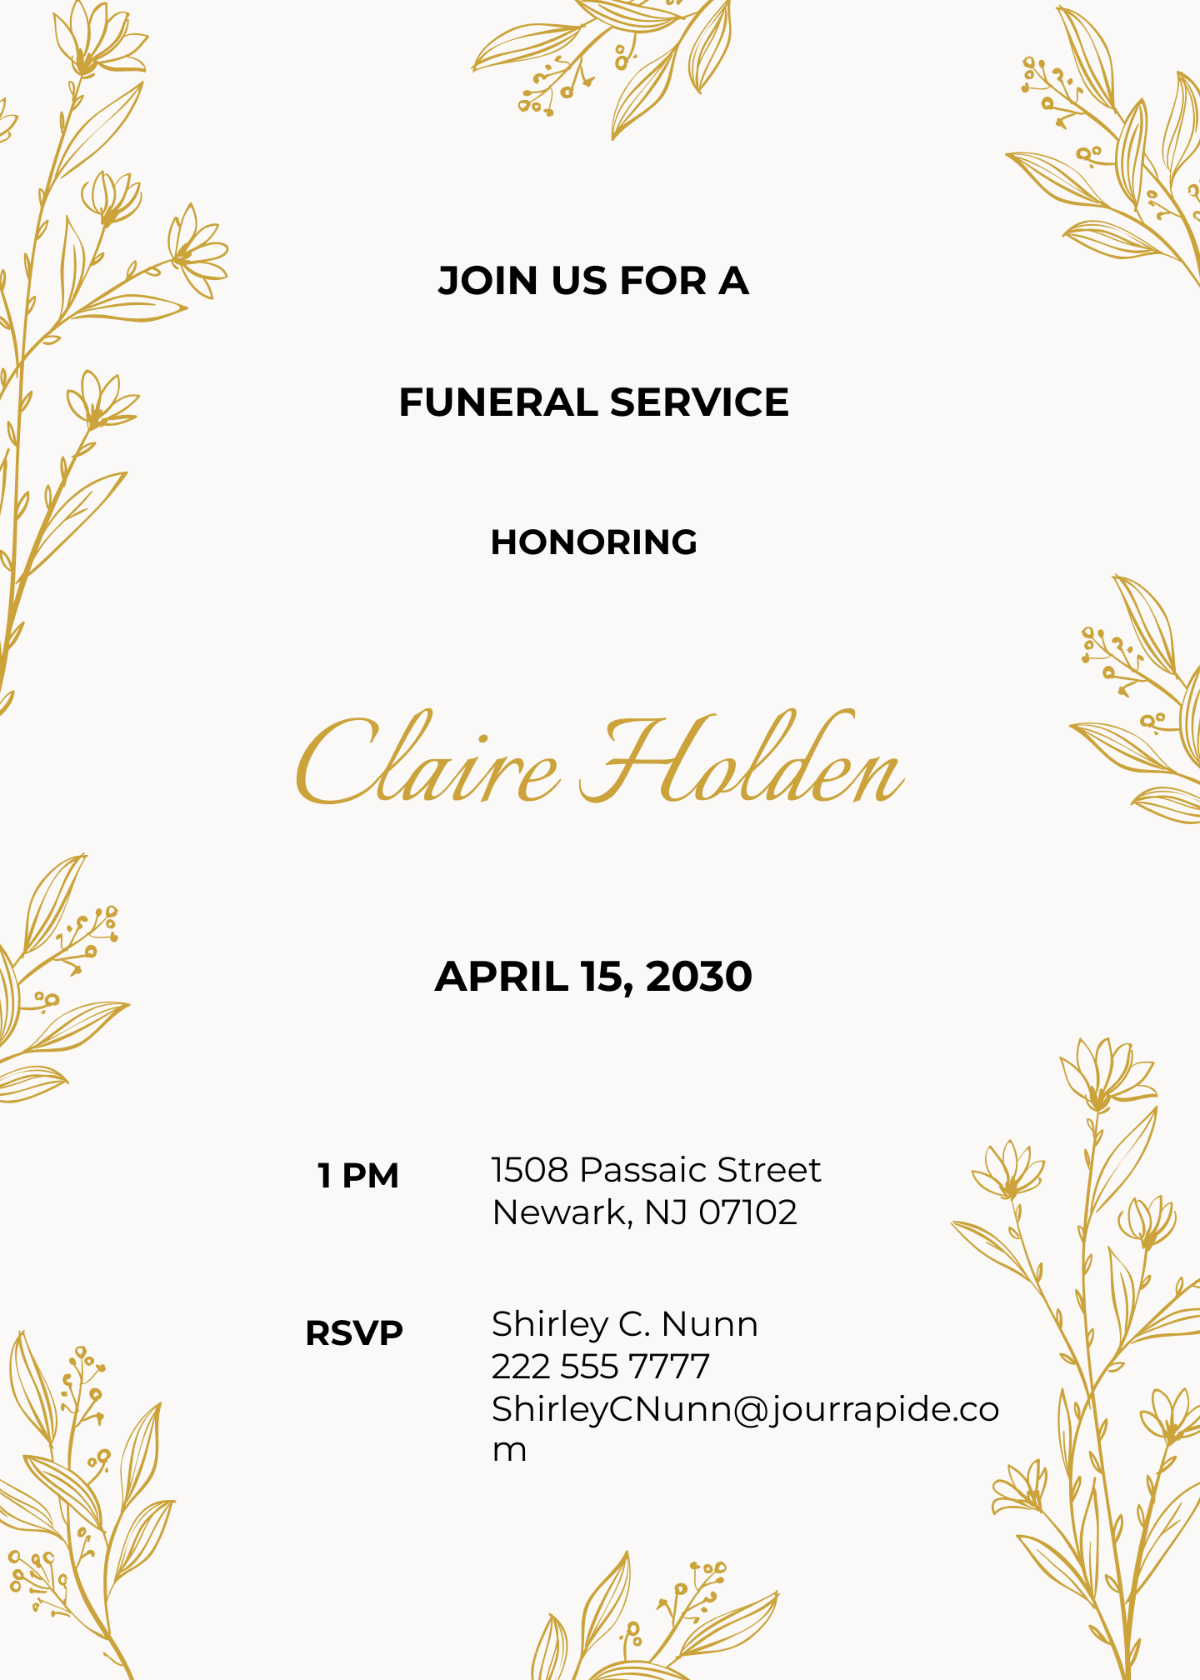 Floral Email Funeral Invitation